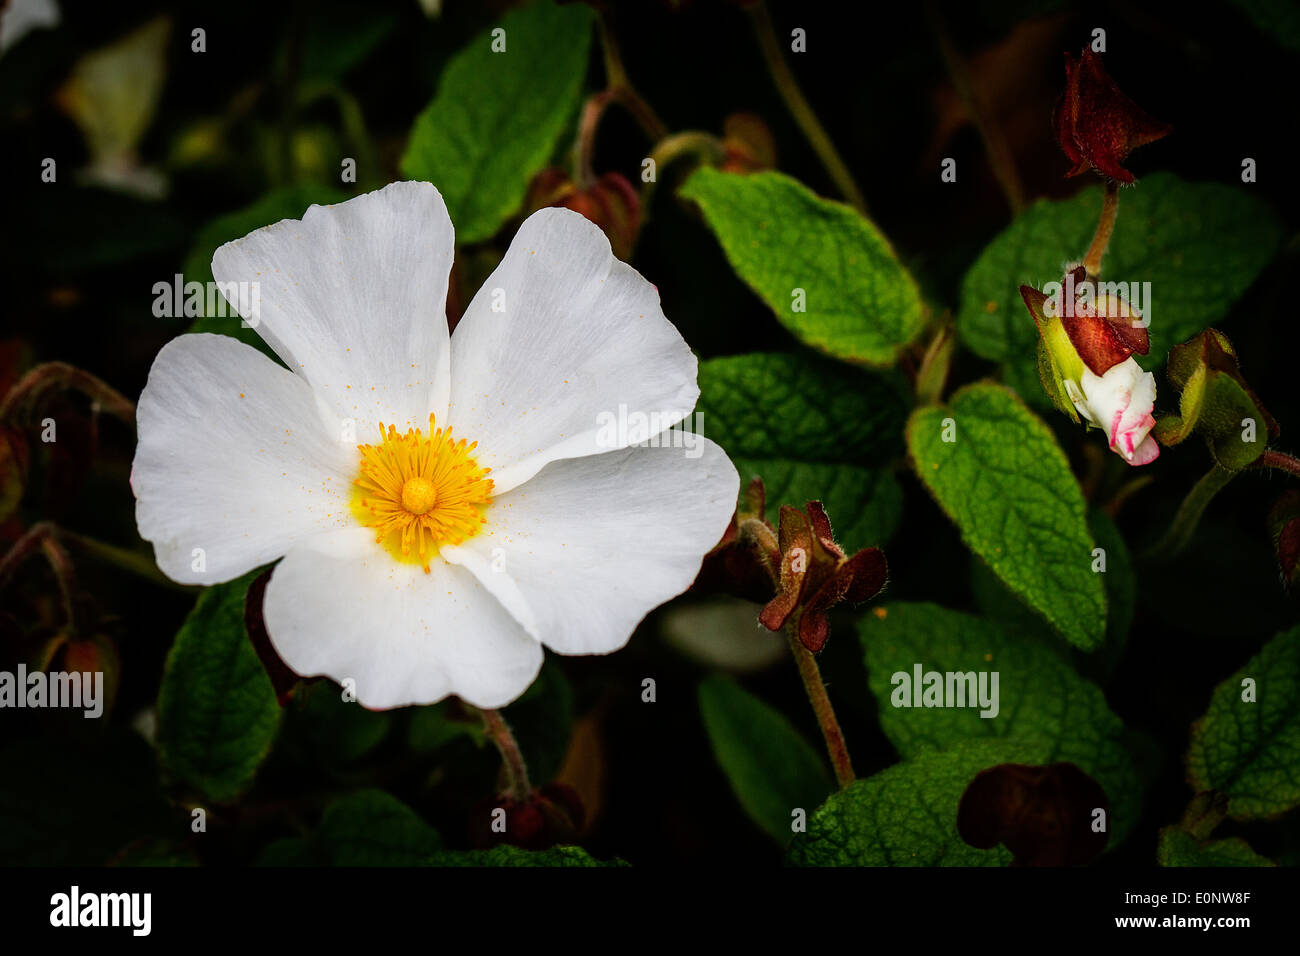 Flower and bud with leaves of a Cistus x corbariensis Stock Photo